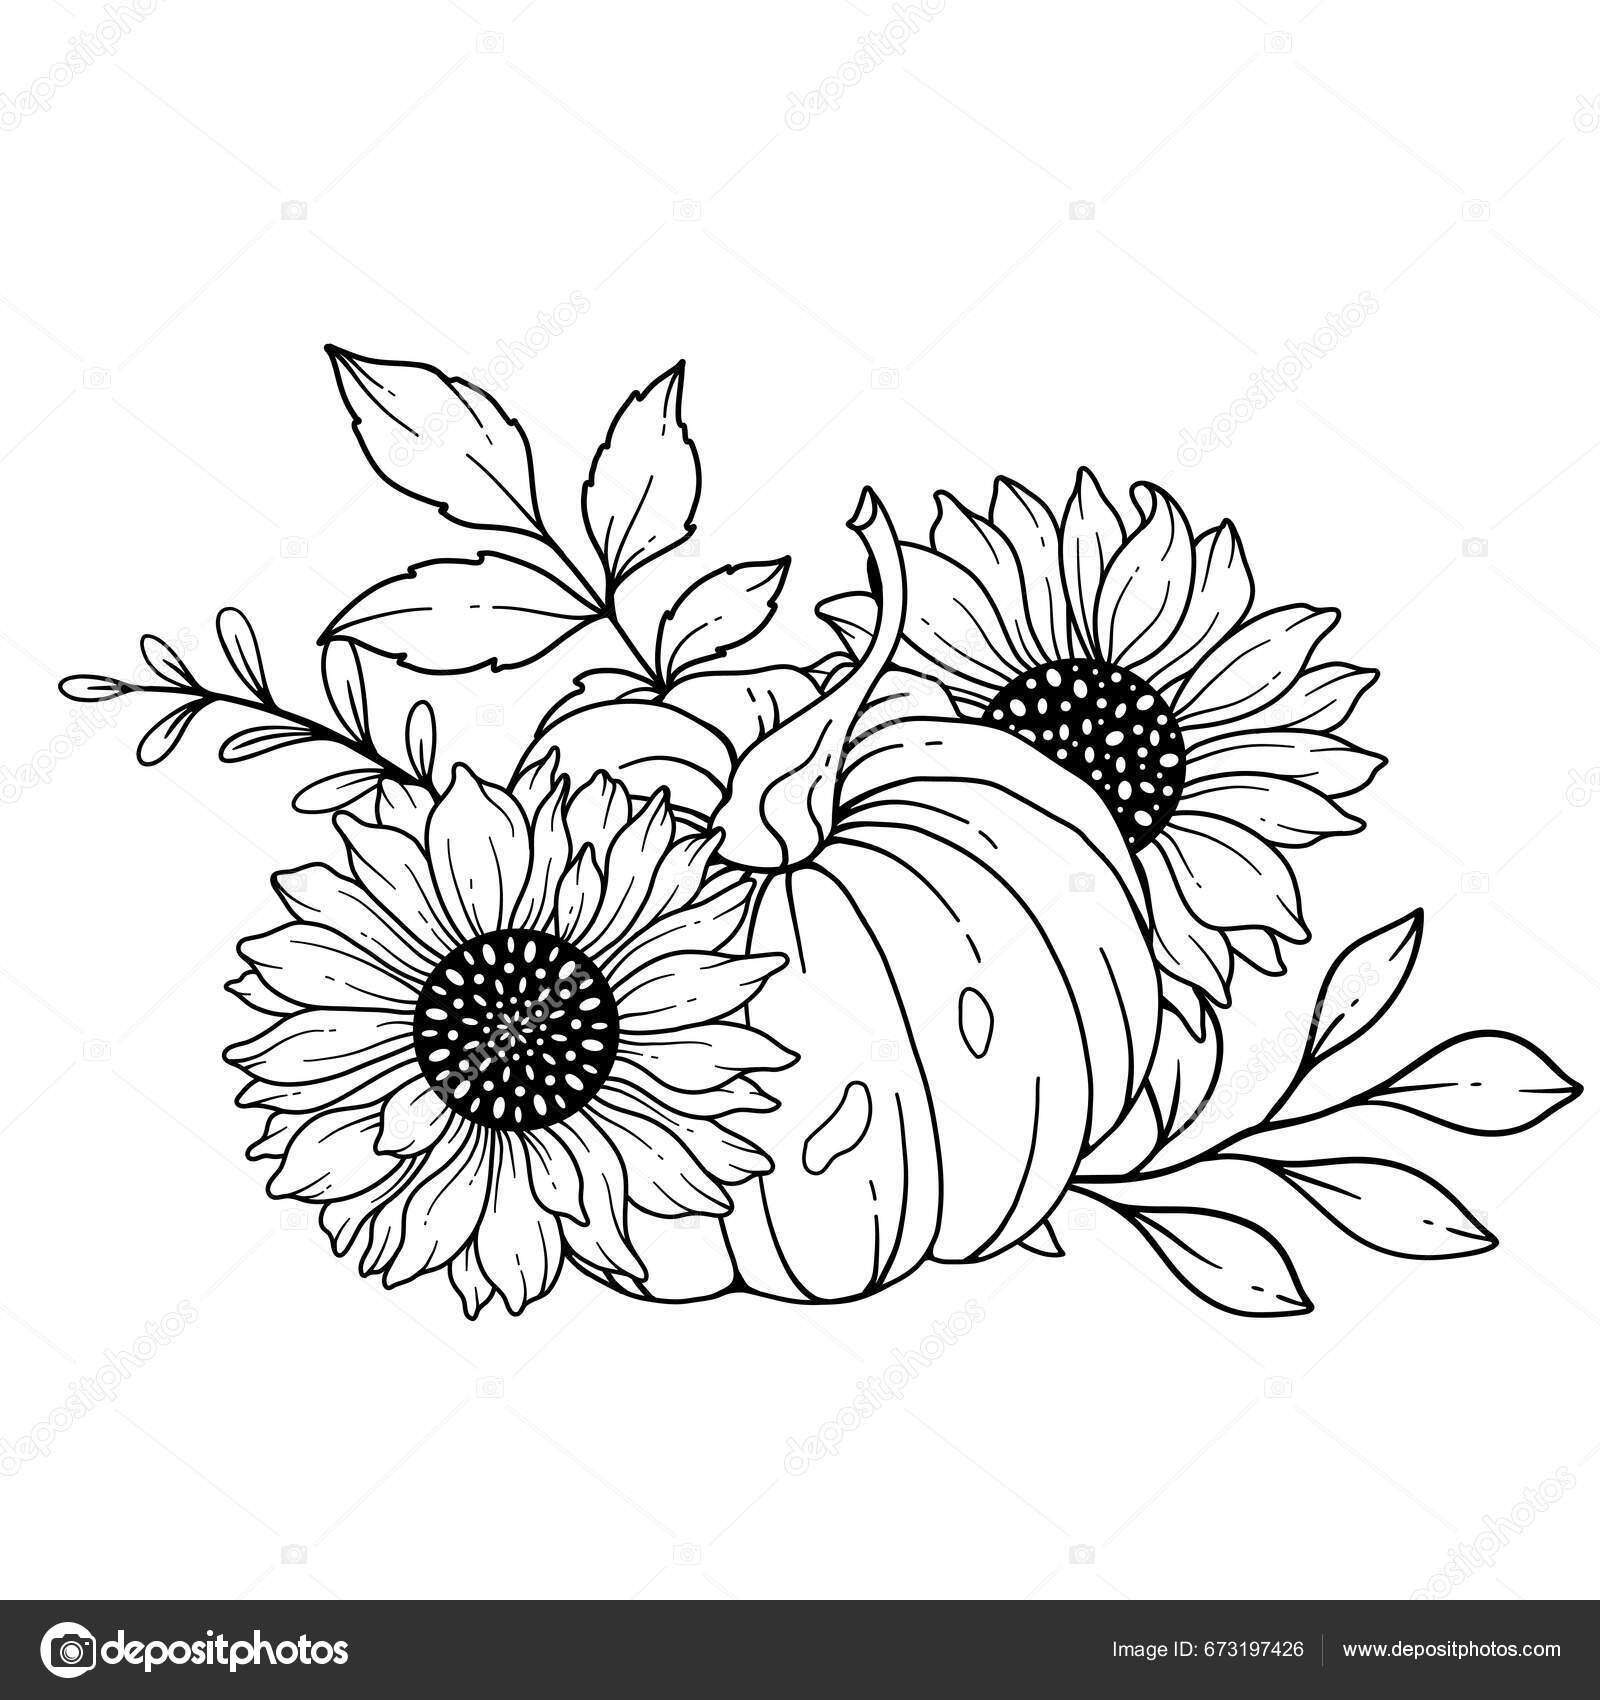 Sunflower Line Drawing Stock Photos and Images - 123RF